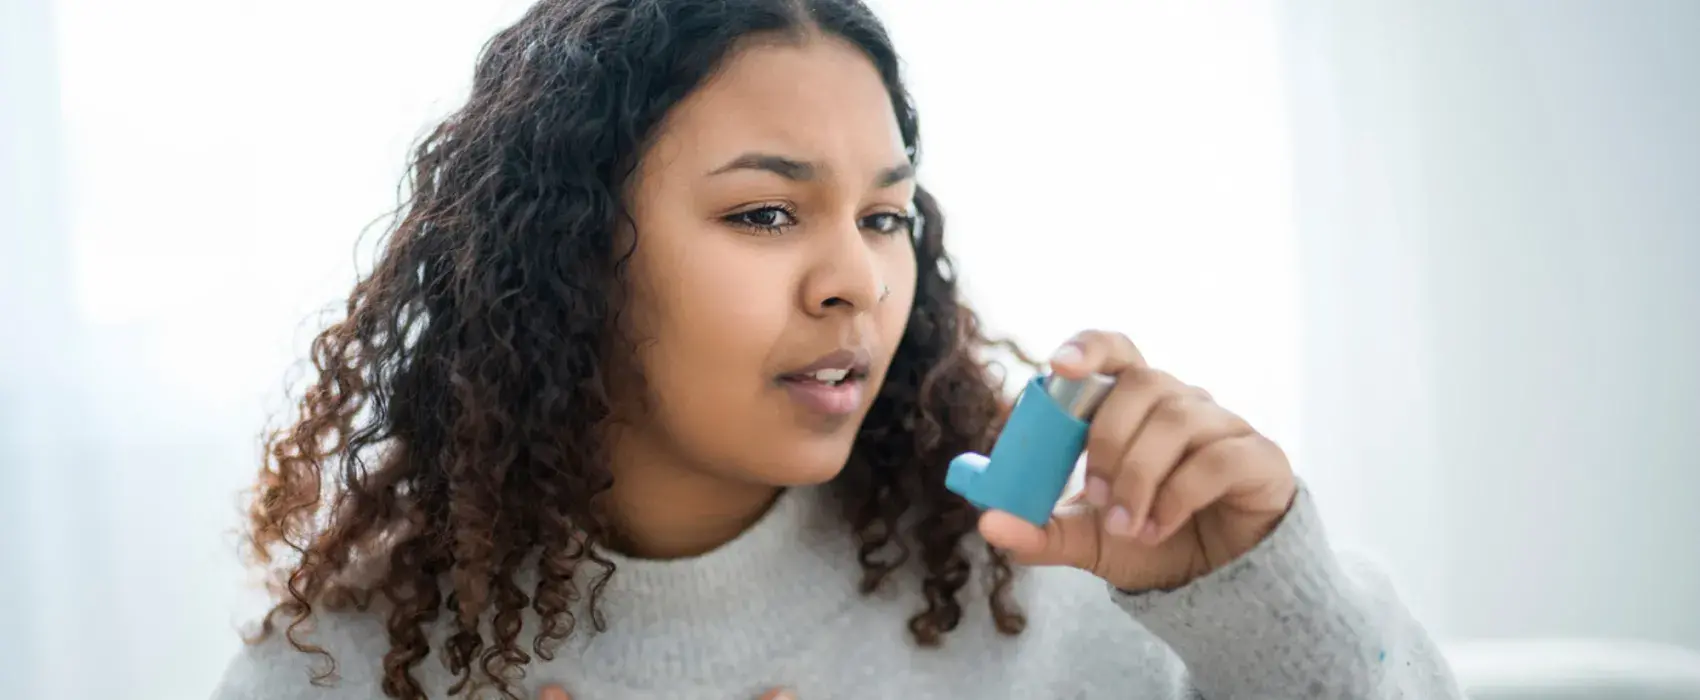 Woman using an inhaler with hand on chest